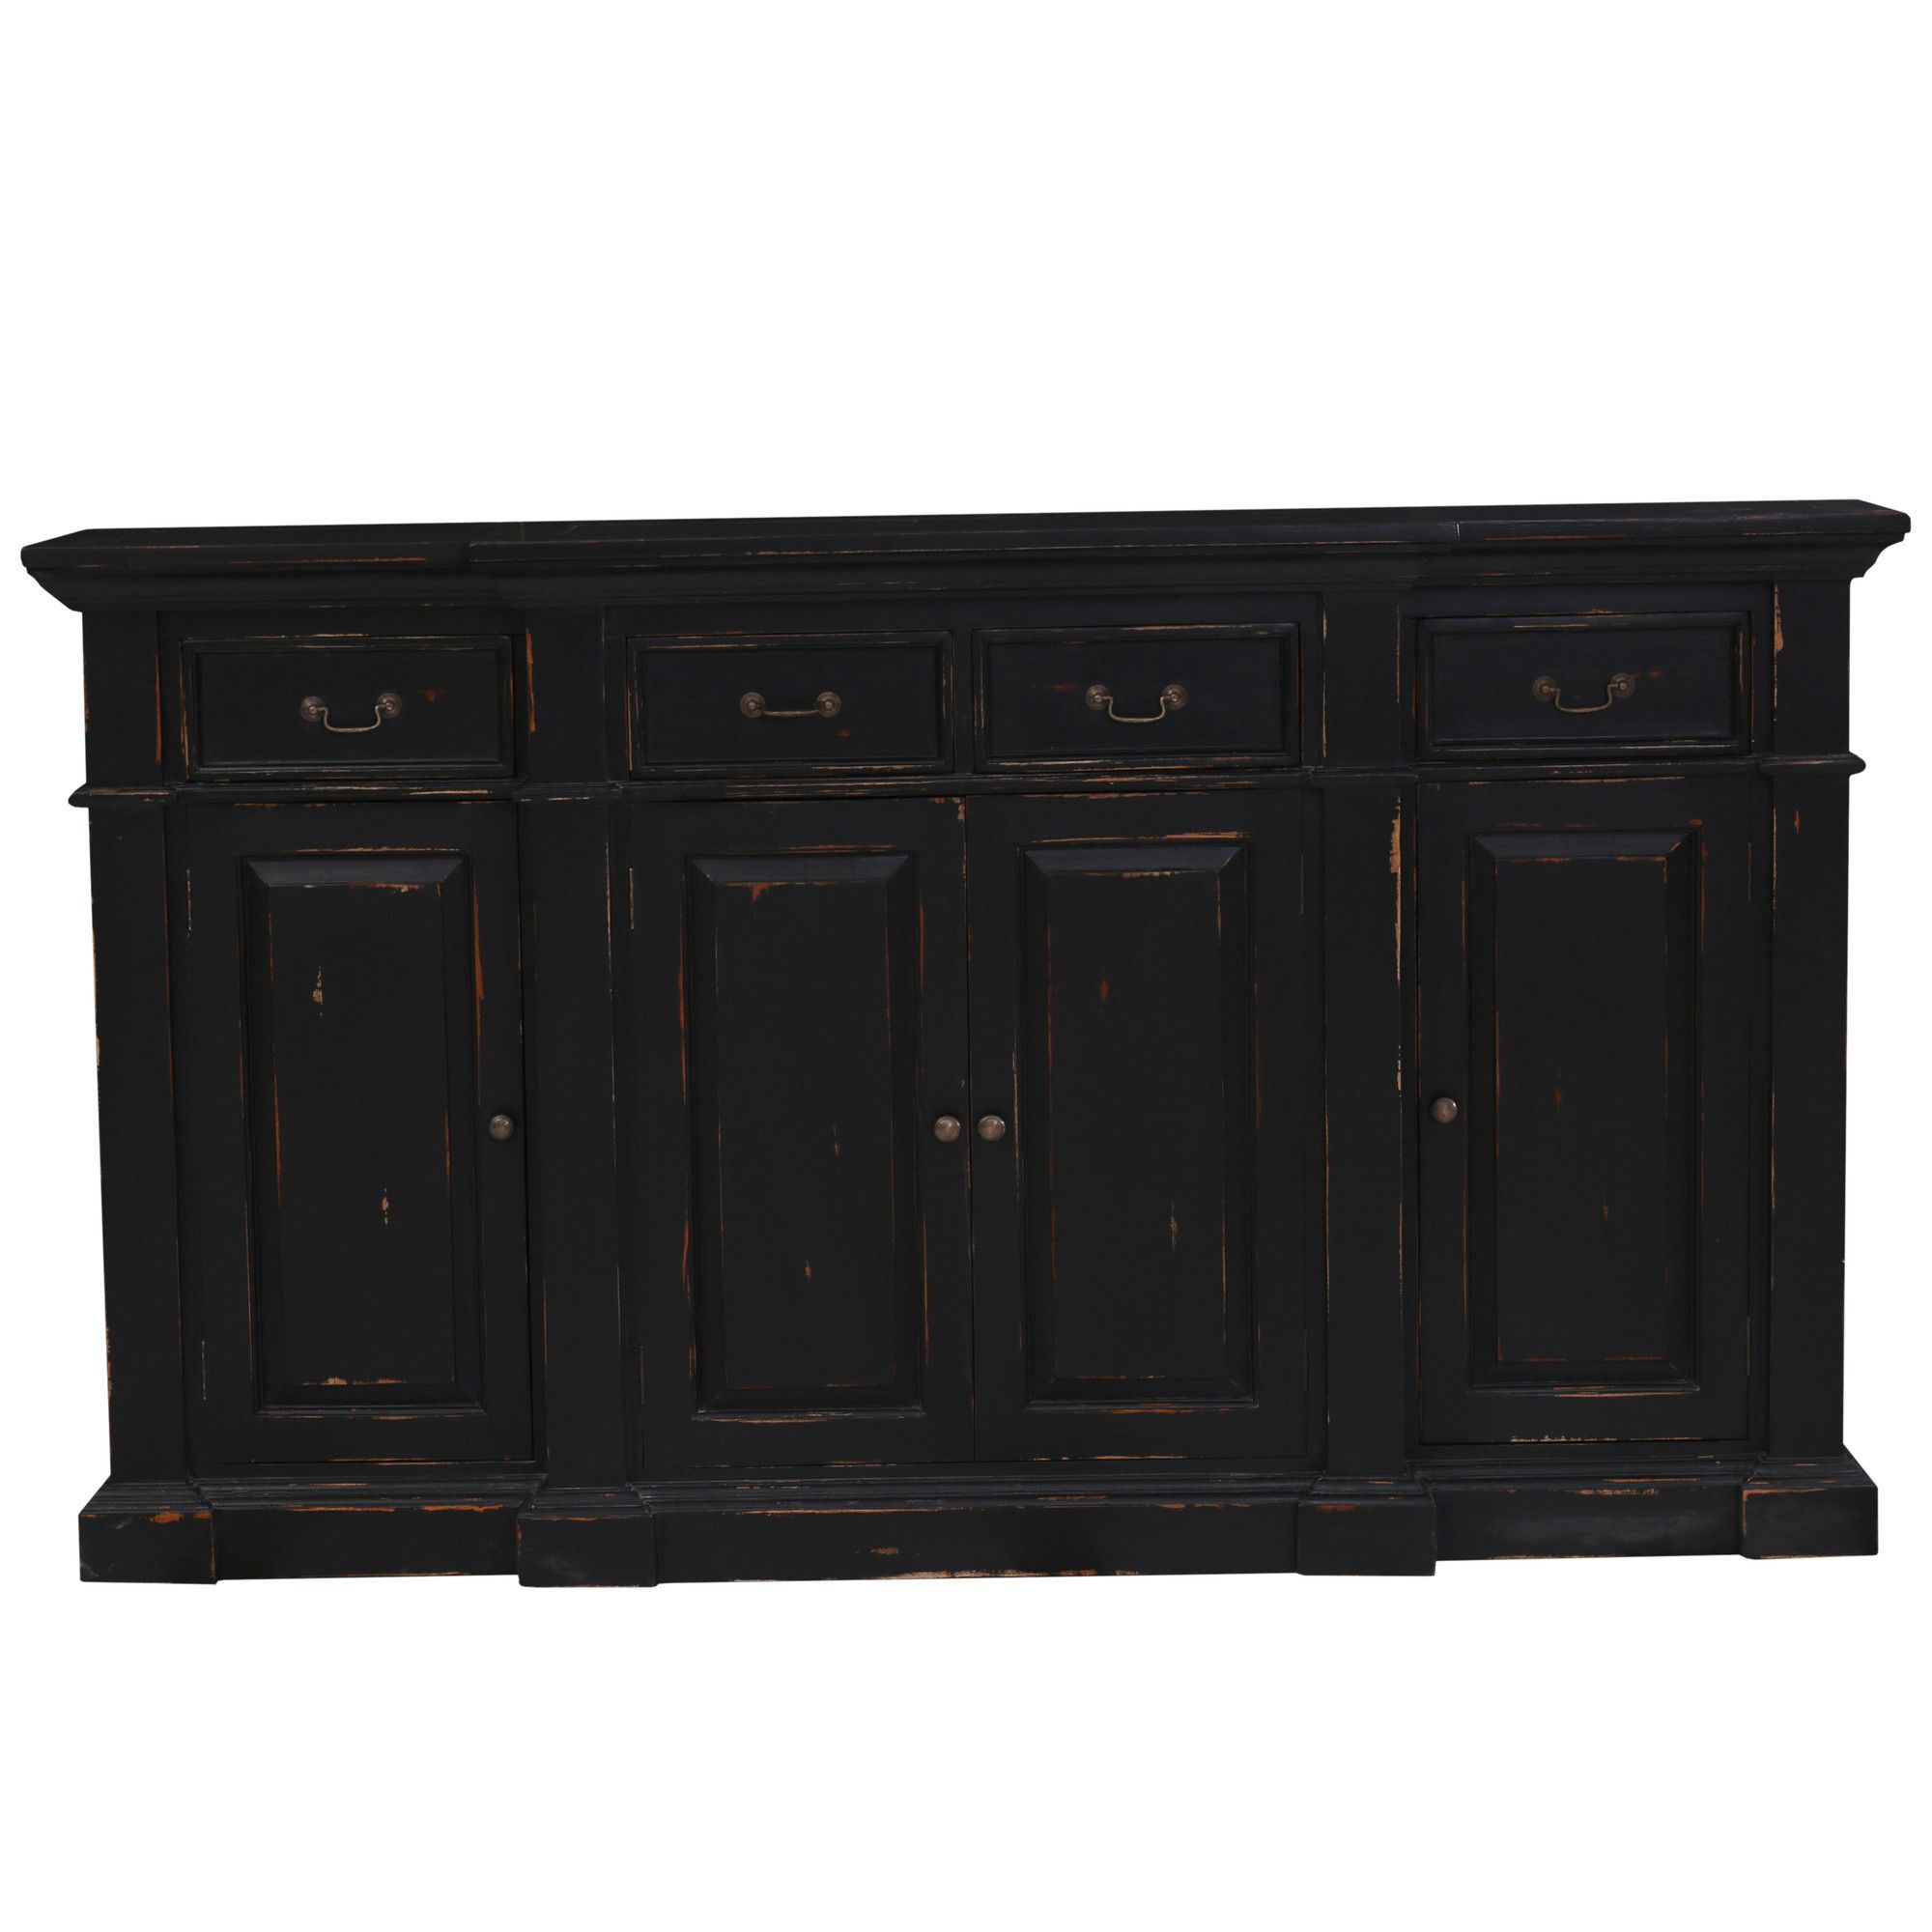 Middleton Sideboard | 971 | Bramble Furniture, Mahogany In Courtdale Sideboards (View 7 of 30)